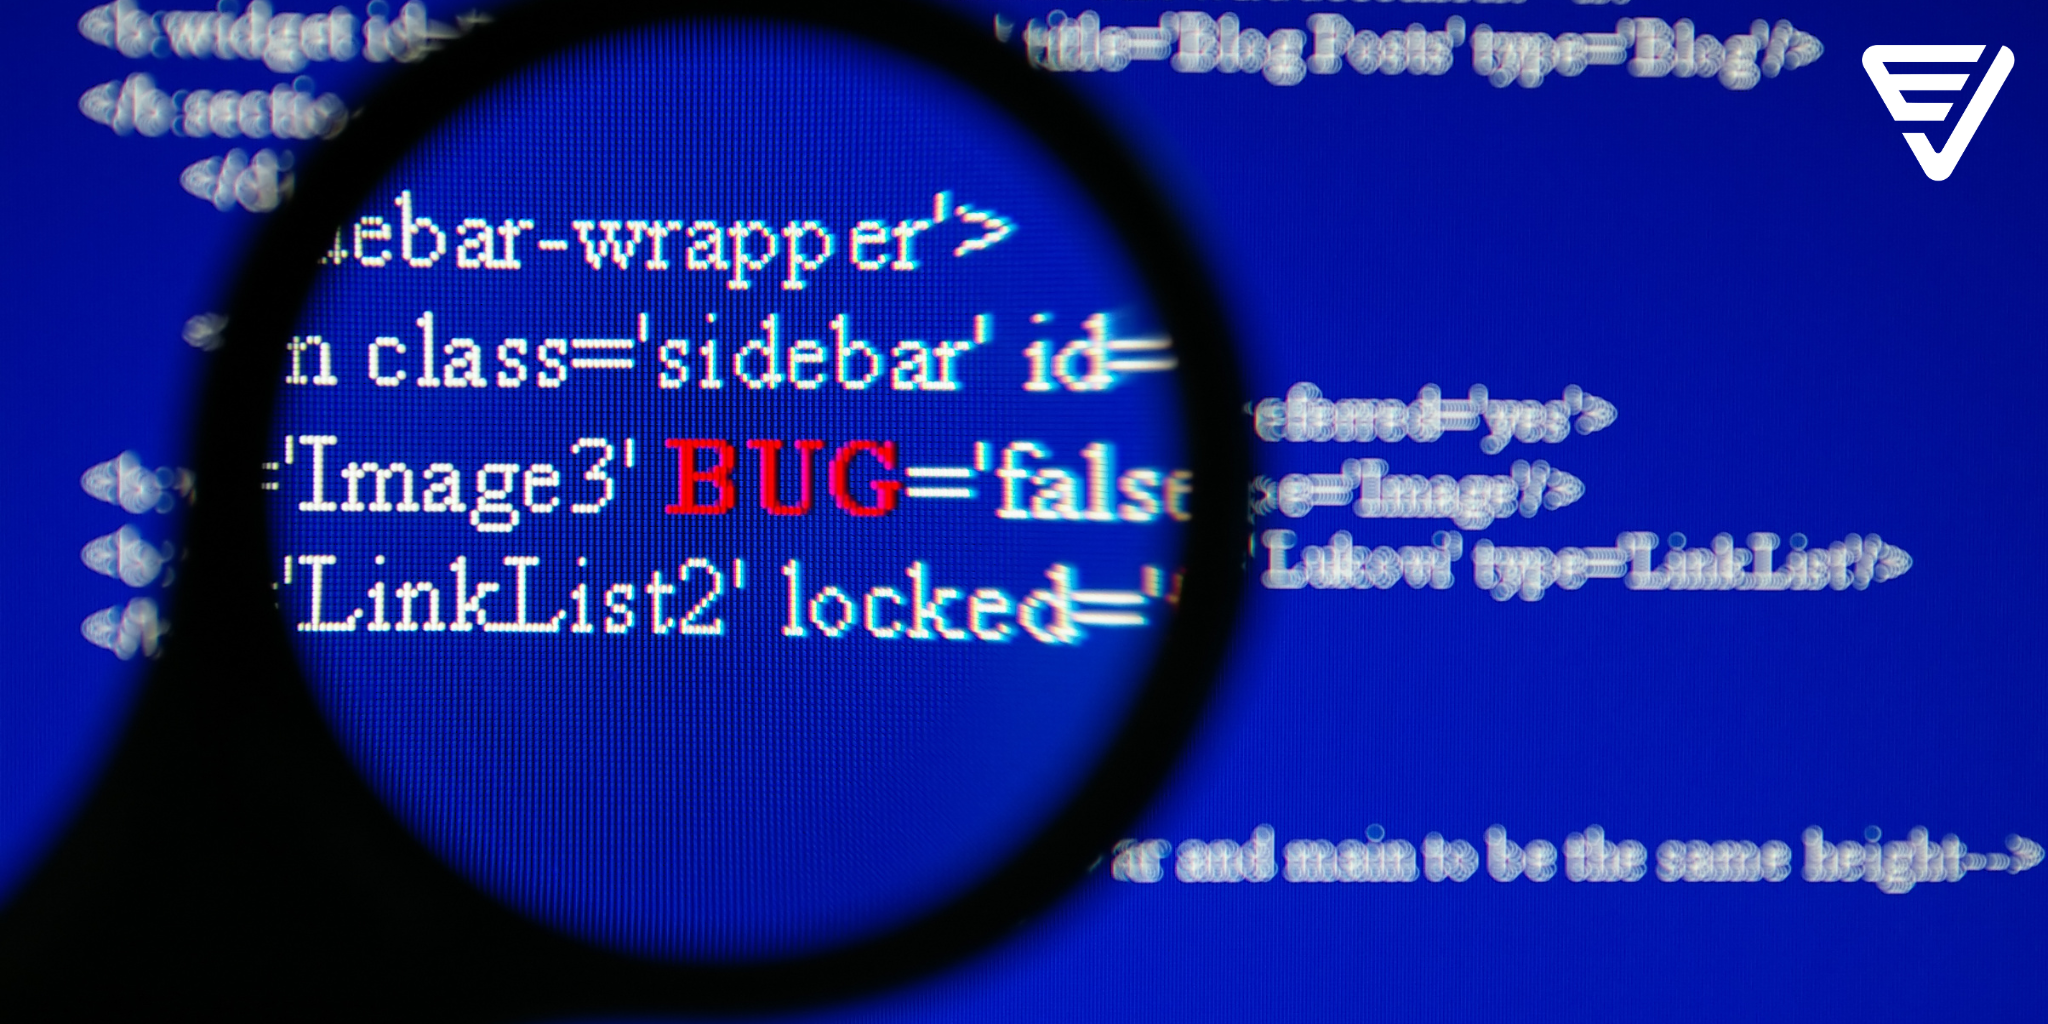 Steps of Bug Tracking in Applications